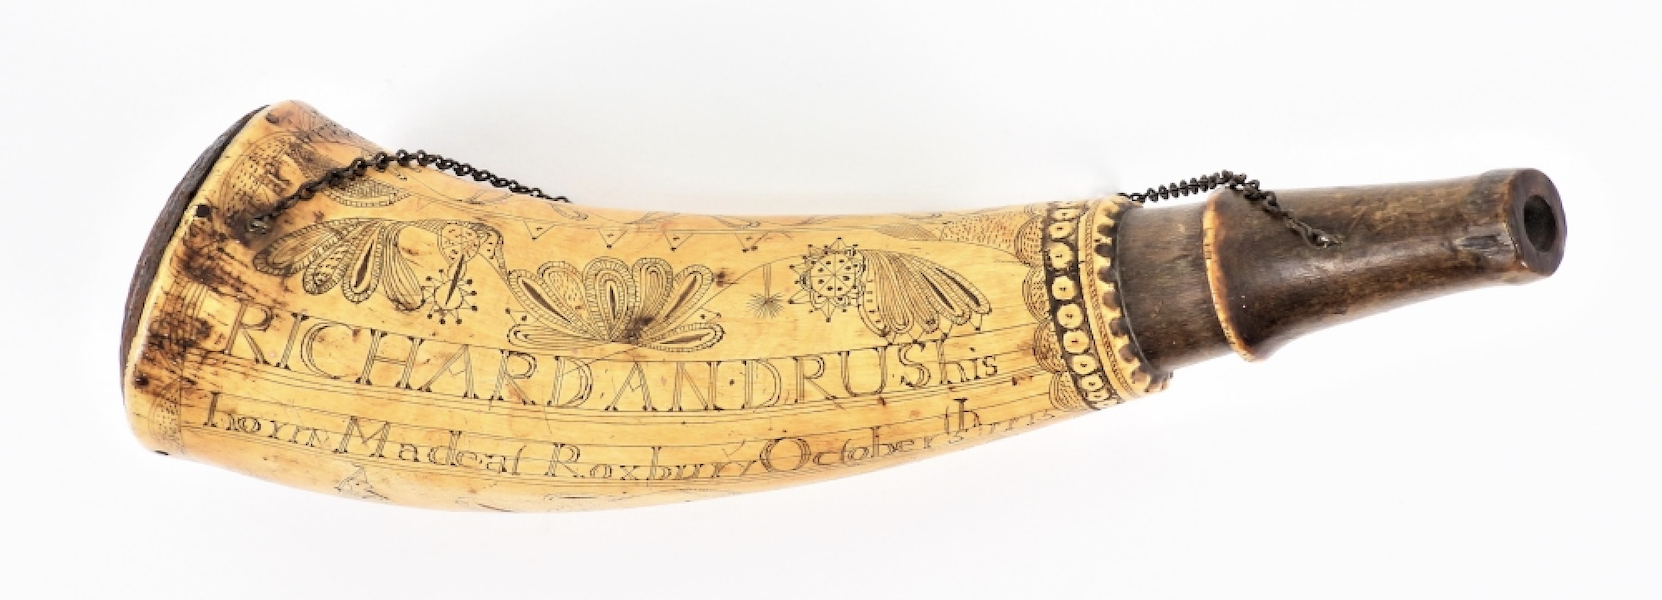 Revolutionary War powder horn belonging to Richard Andrus, who marched with Captain Abel Pettibone’s 7th Company, 2nd Regiment, to the Siege of Boston in 1775, estimated at $4,000-$8,000